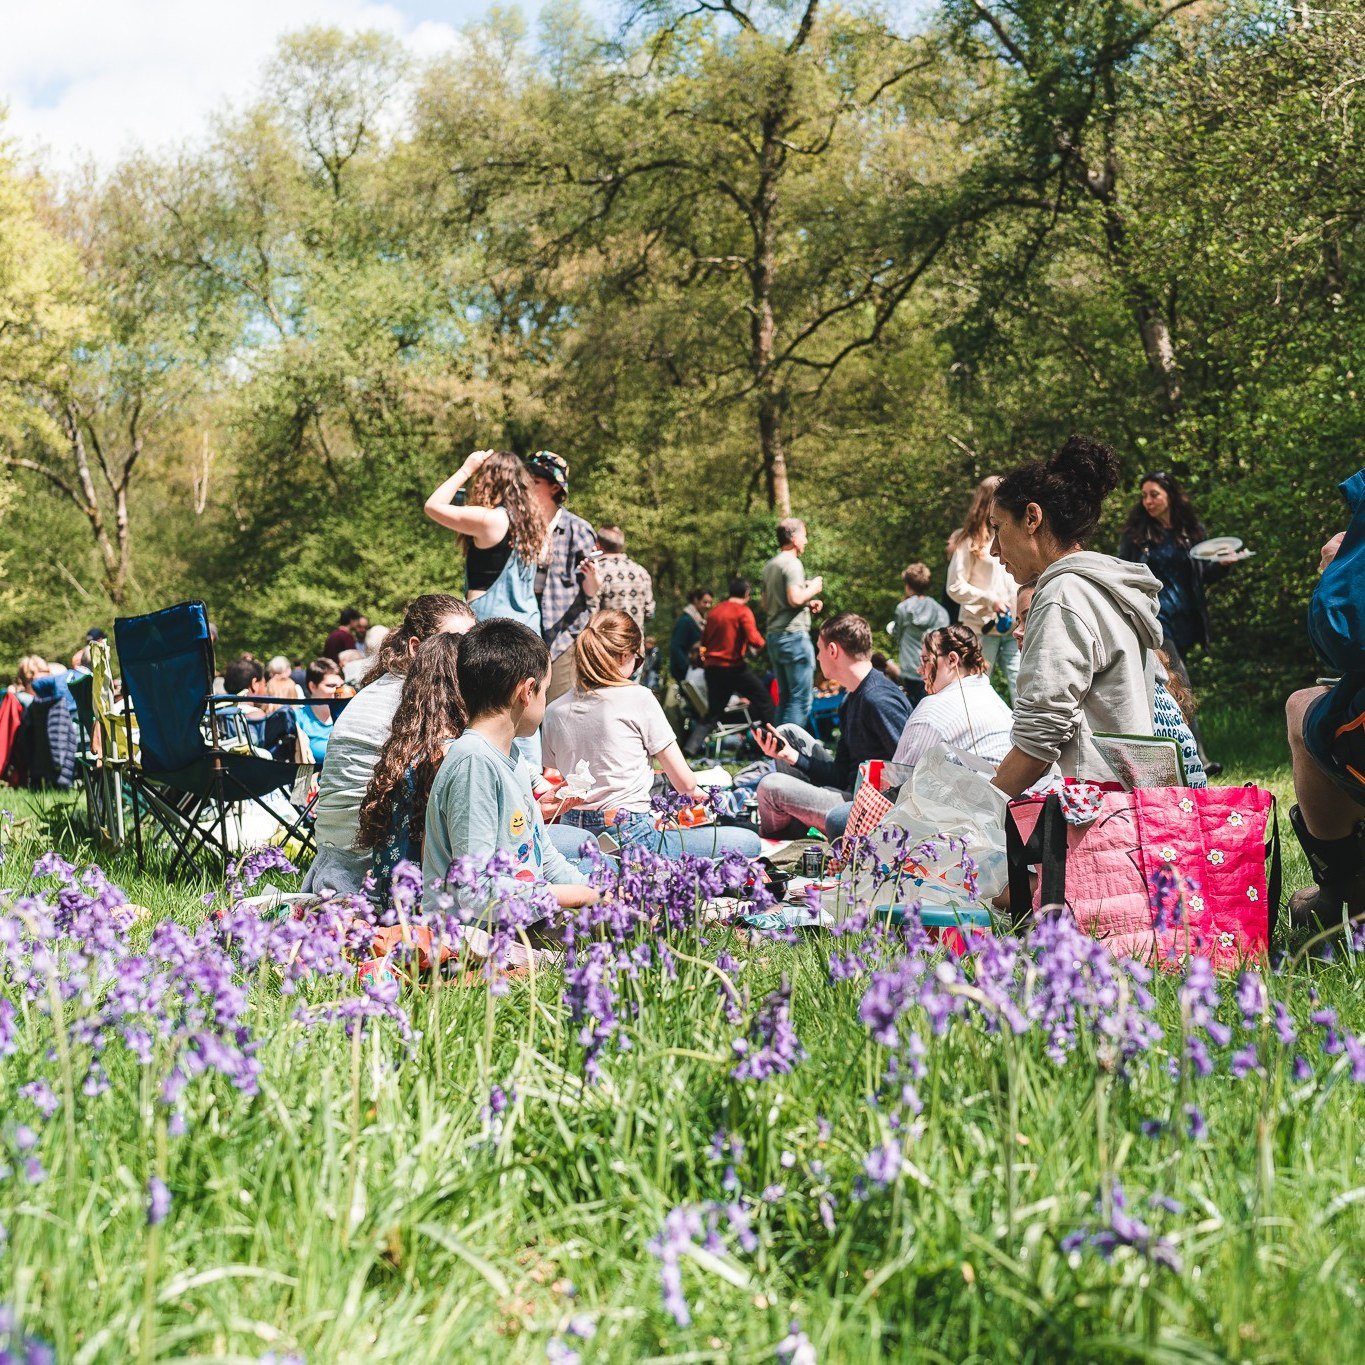 We love going to the Bluebell Woods every May to enjoy God's creation and each others' company over an amazing BBQ! Make sure to book on to let us know you're joining us this Sunday afternoon - head to the diary page of the website! 💻